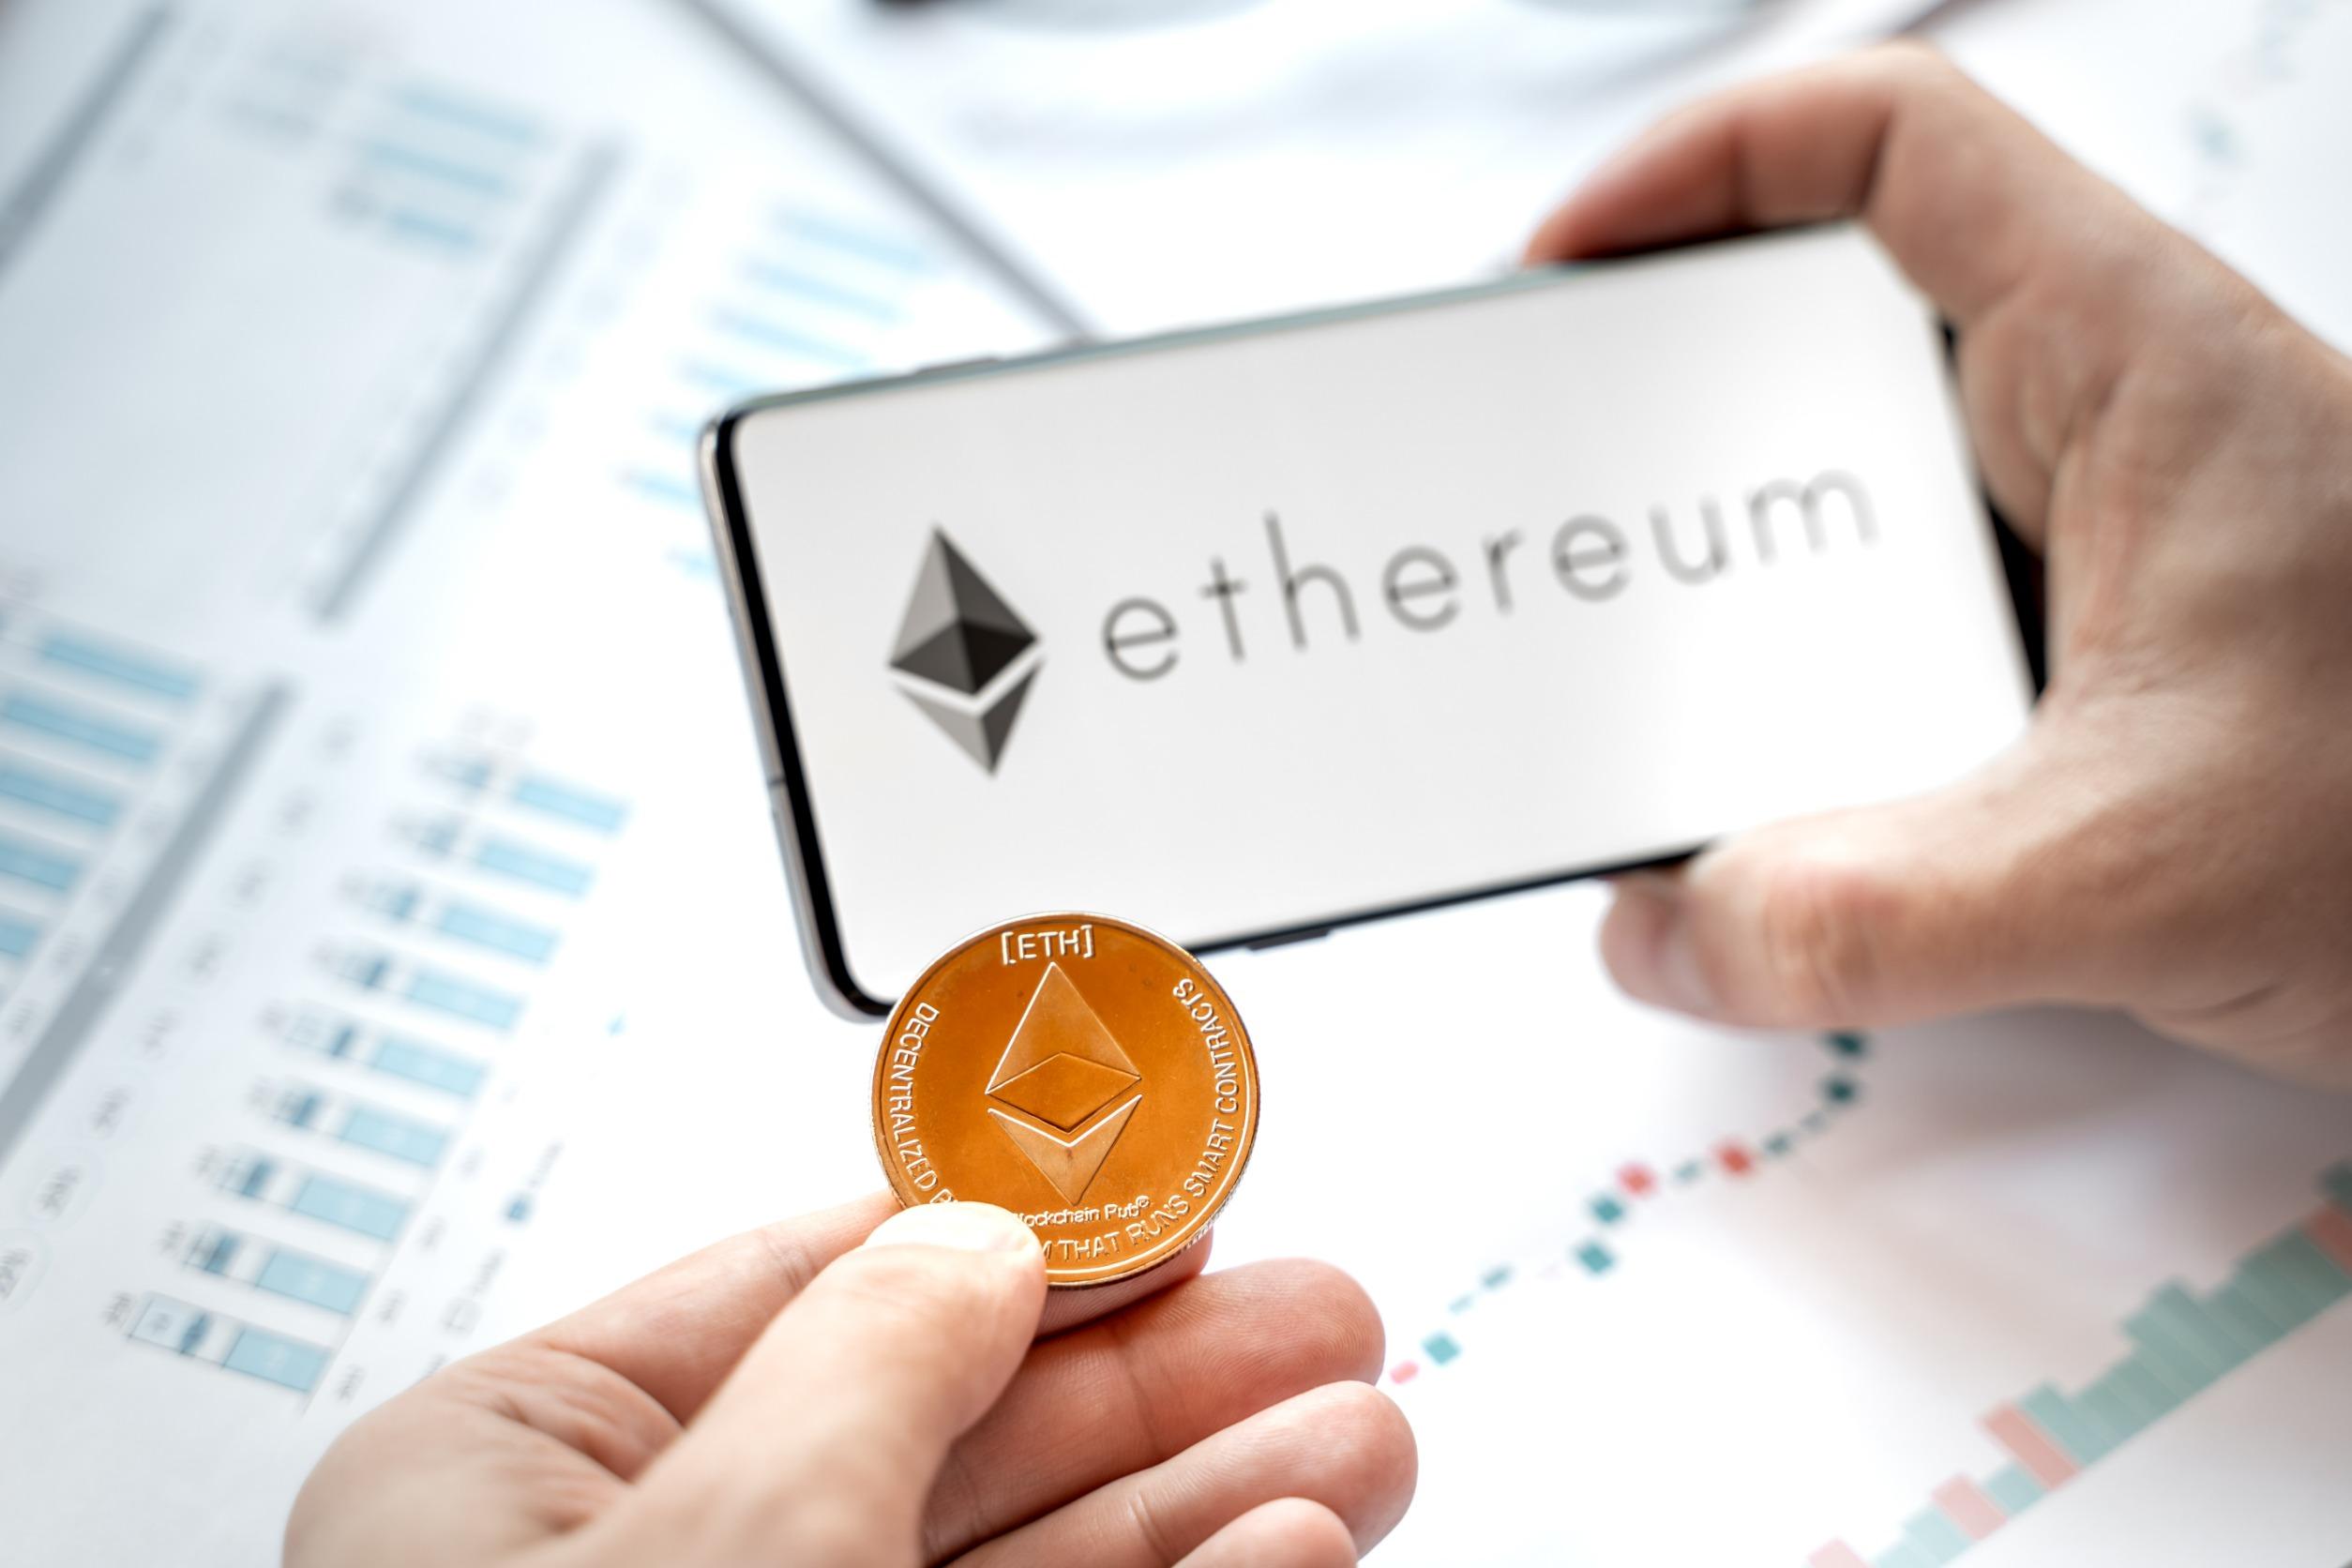 Ethereum price: Amid the risk aversion, the bullish trend is still intact